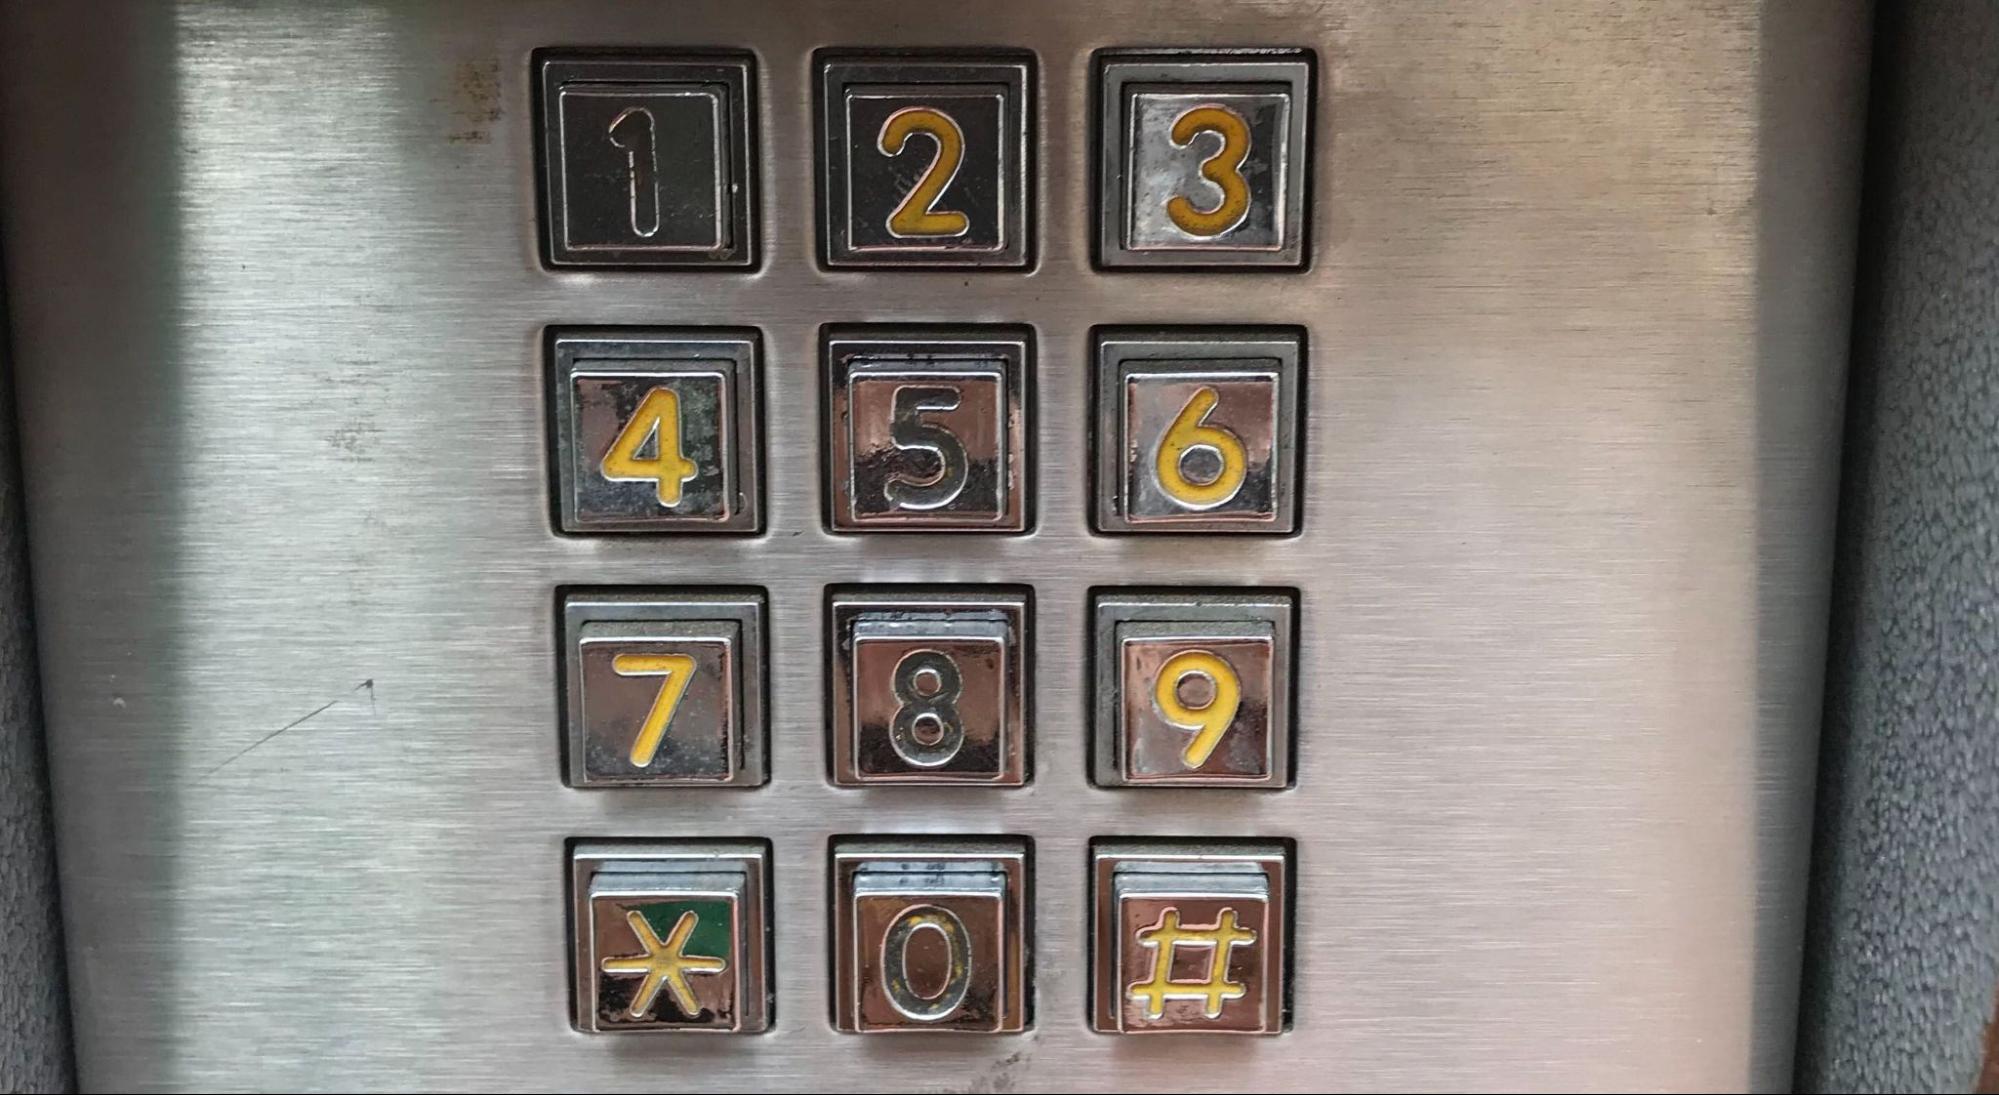 a numeric access keypad of which the paint on the numbers 1, 5, 8 and 0 are worn off.  Source.